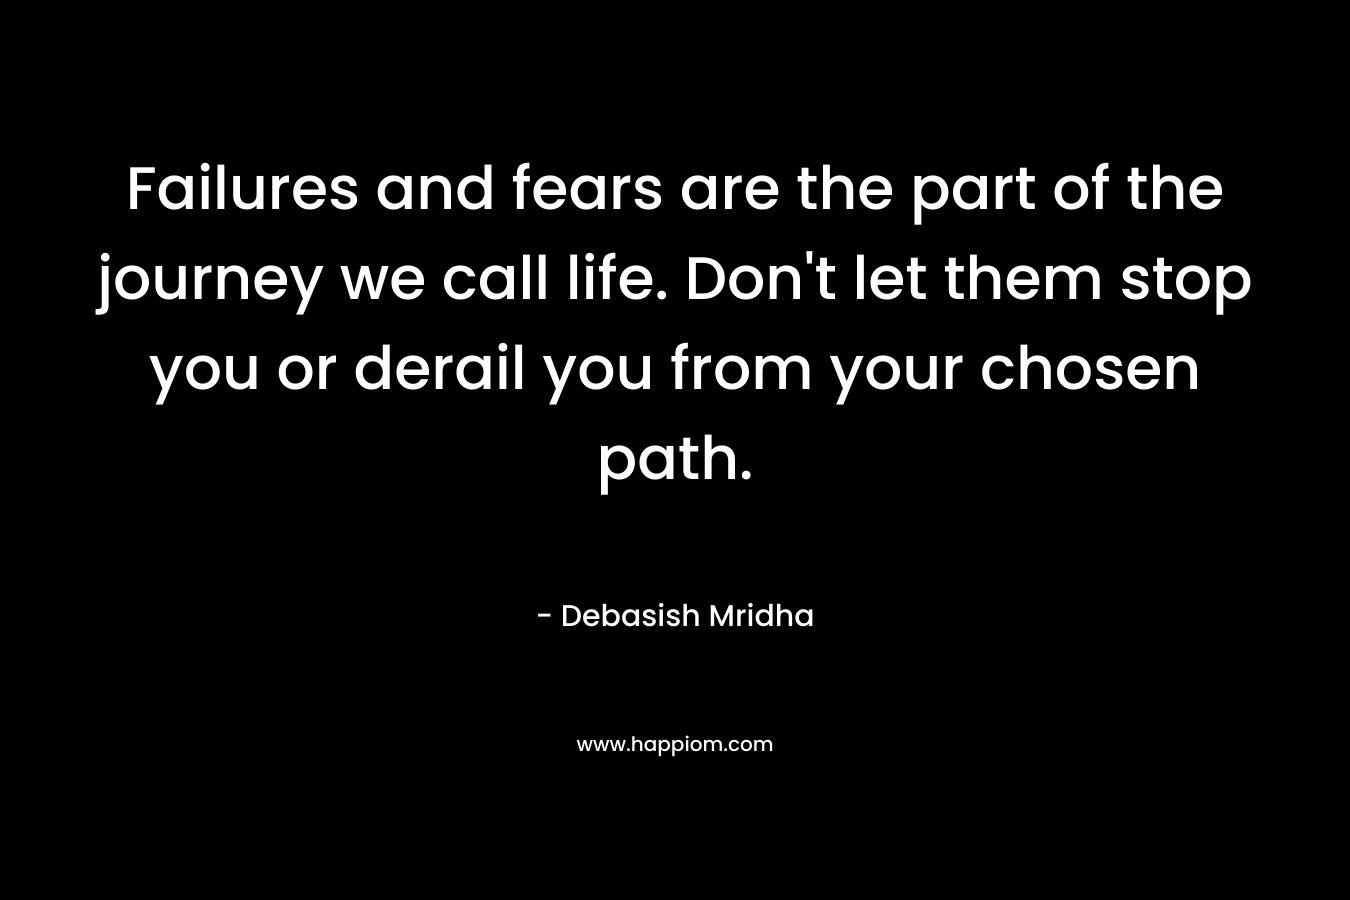 Failures and fears are the part of the journey we call life. Don’t let them stop you or derail you from your chosen path. – Debasish Mridha